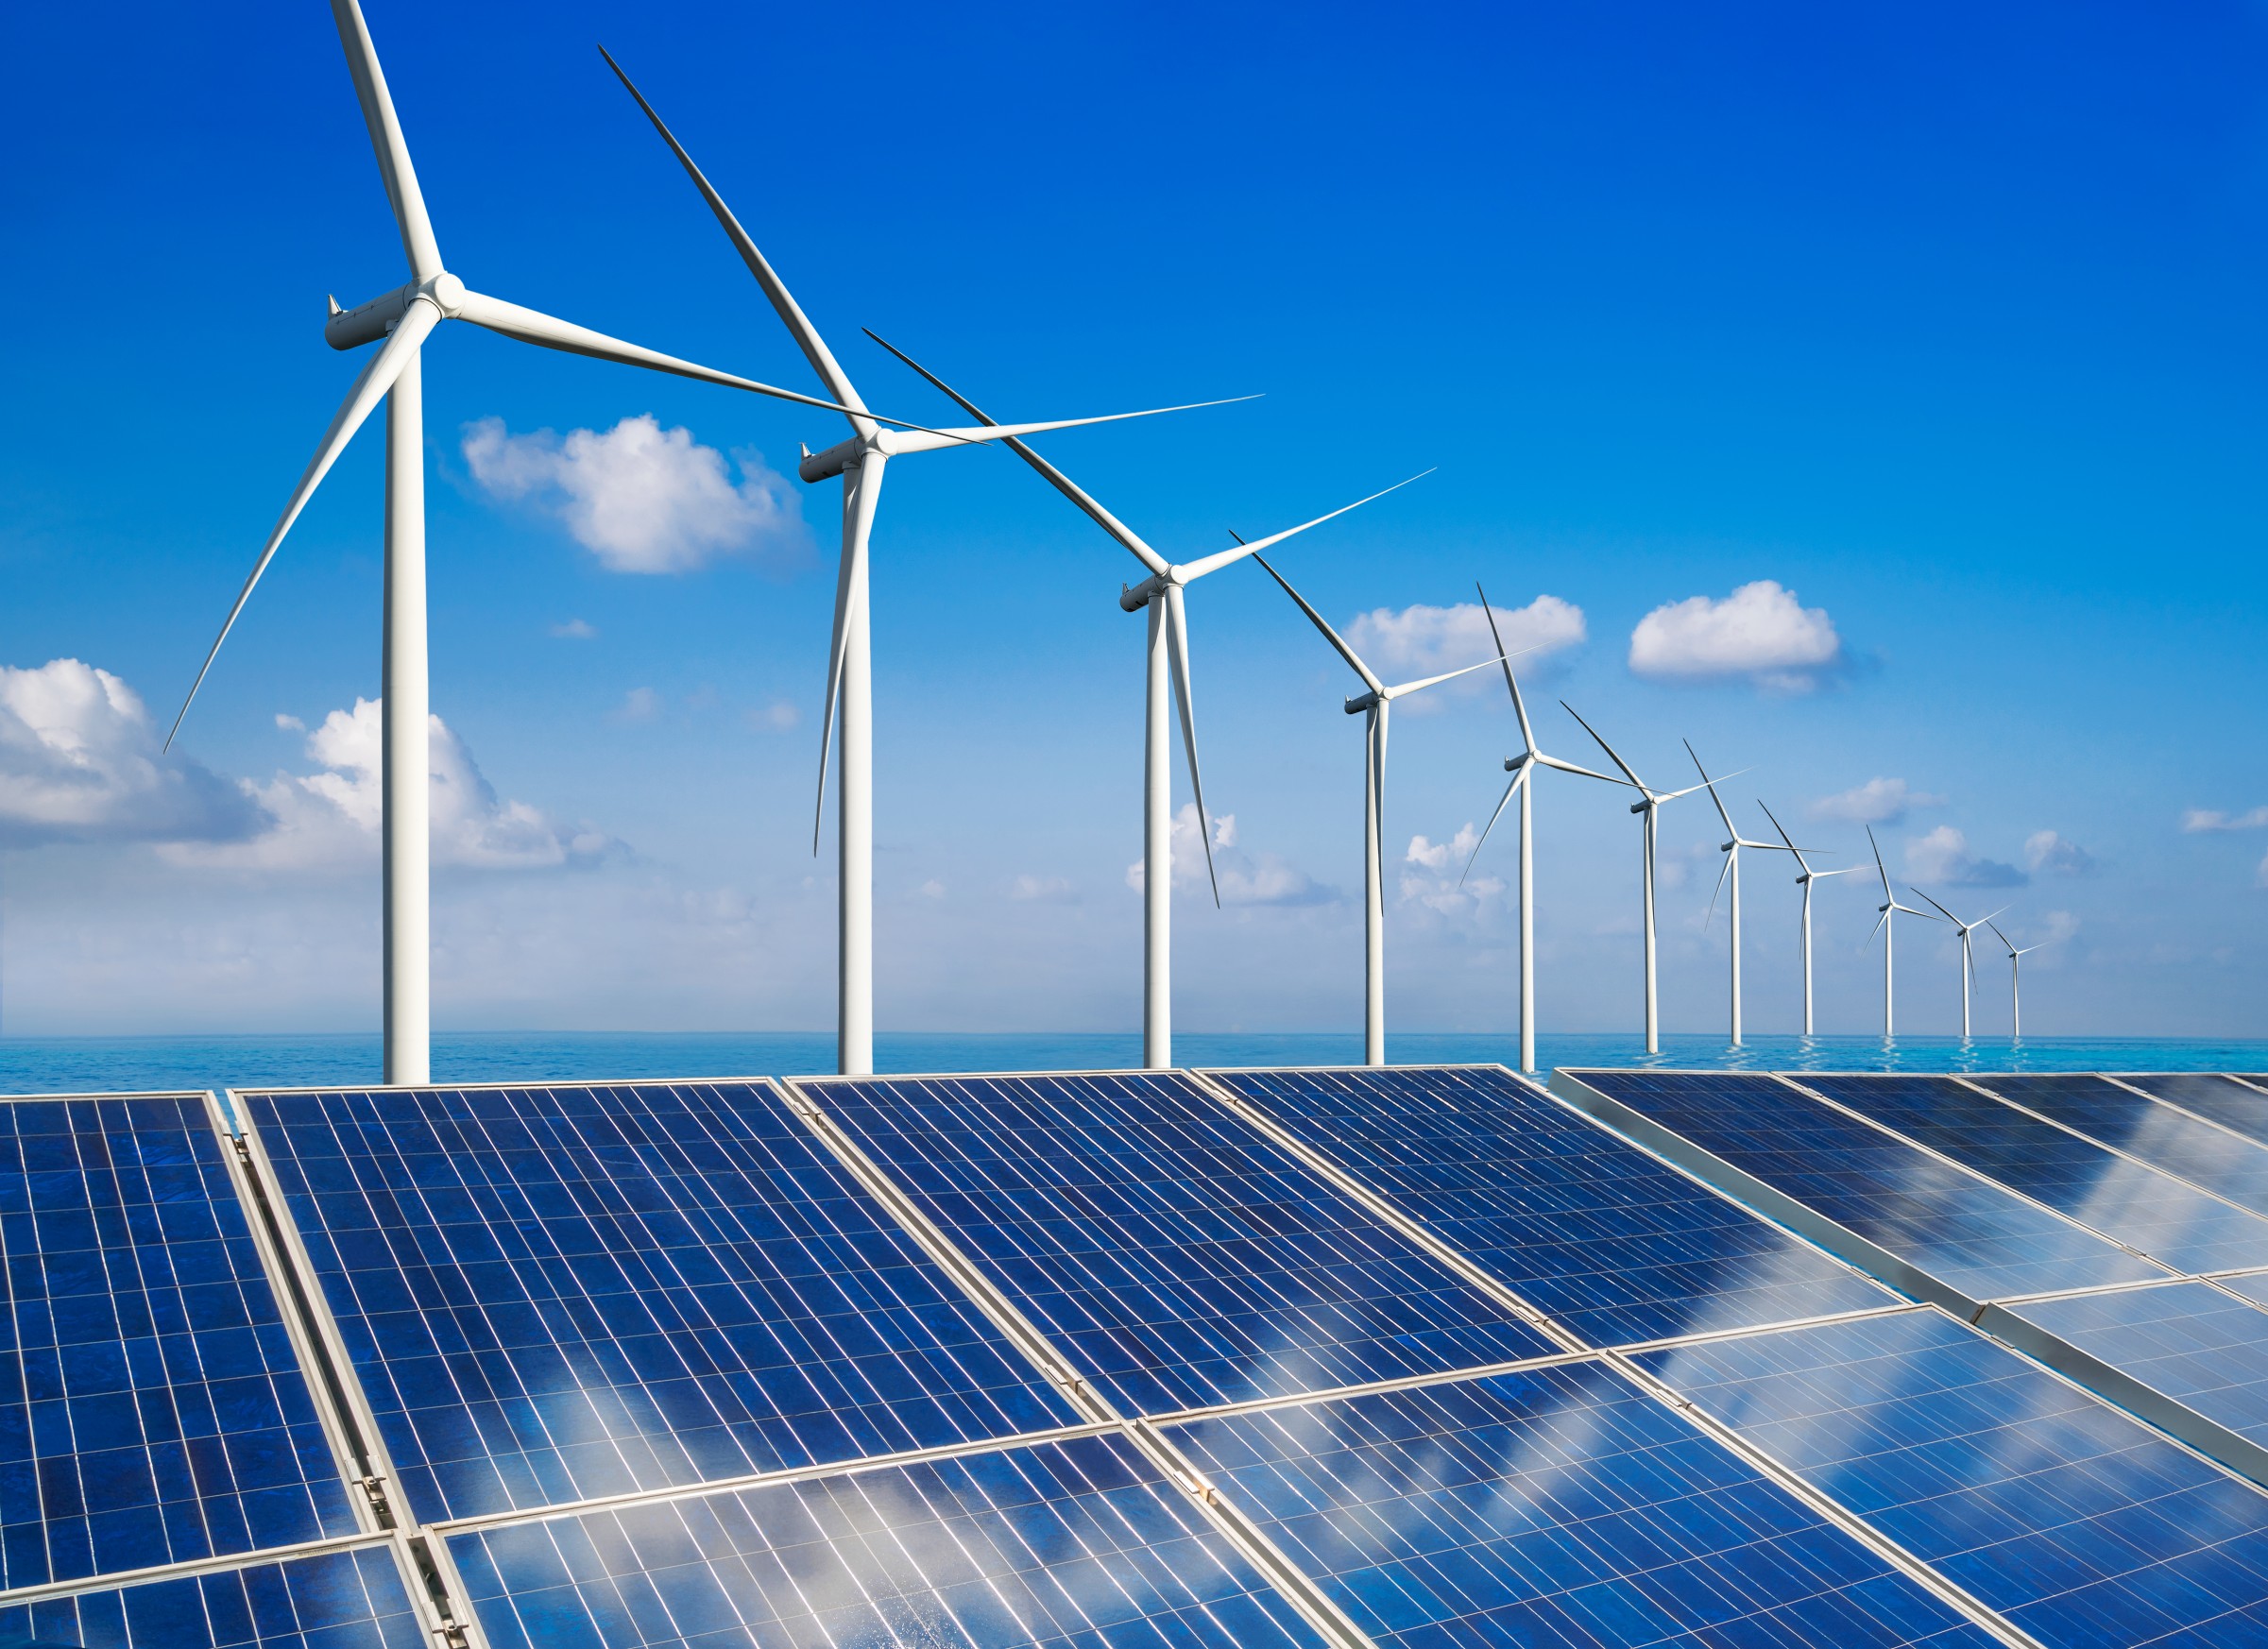 GULF joins forces with GUNKUL to jointly develop 1,000 MW of renewable energy within 5 years.